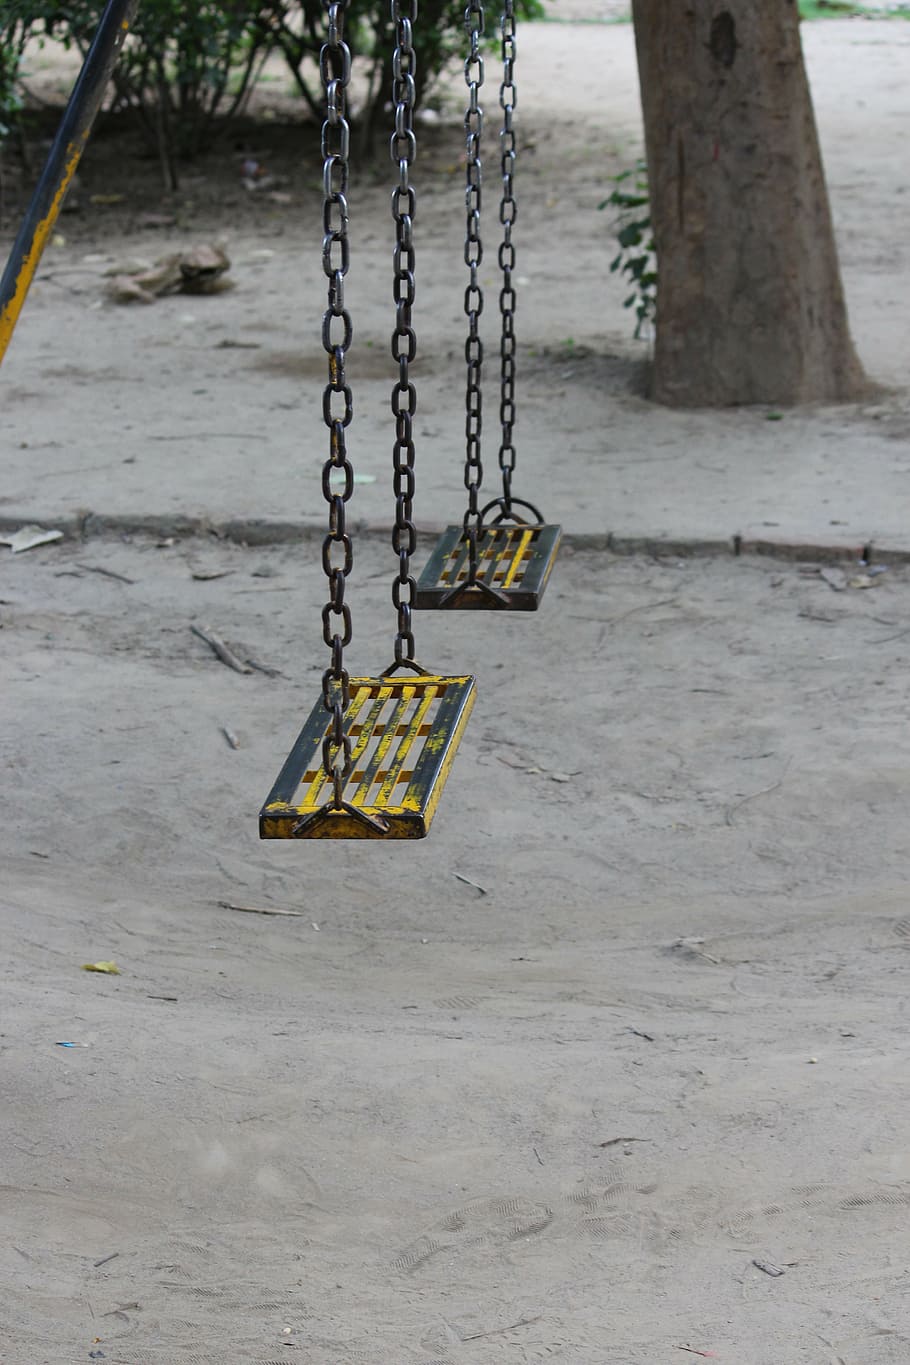 swing, empty, park, chain, hanging, no people, day, metal, playground